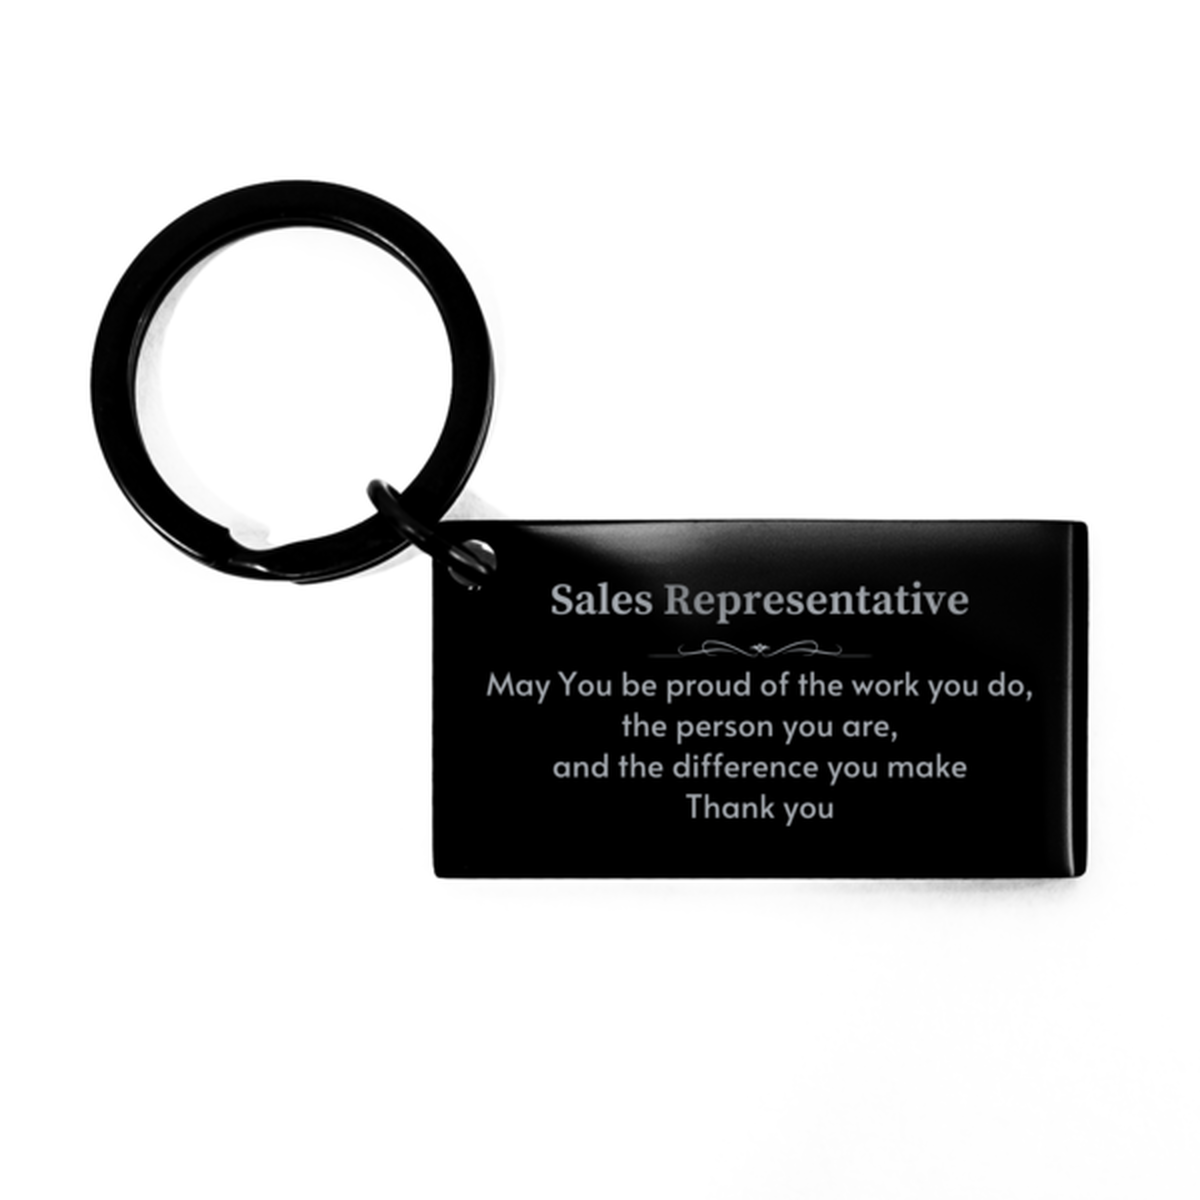 Heartwarming Keychain Retirement Coworkers Gifts for Sales Representative, Trainer May You be proud of the work you do, the person you are Gifts for Boss Men Women Friends